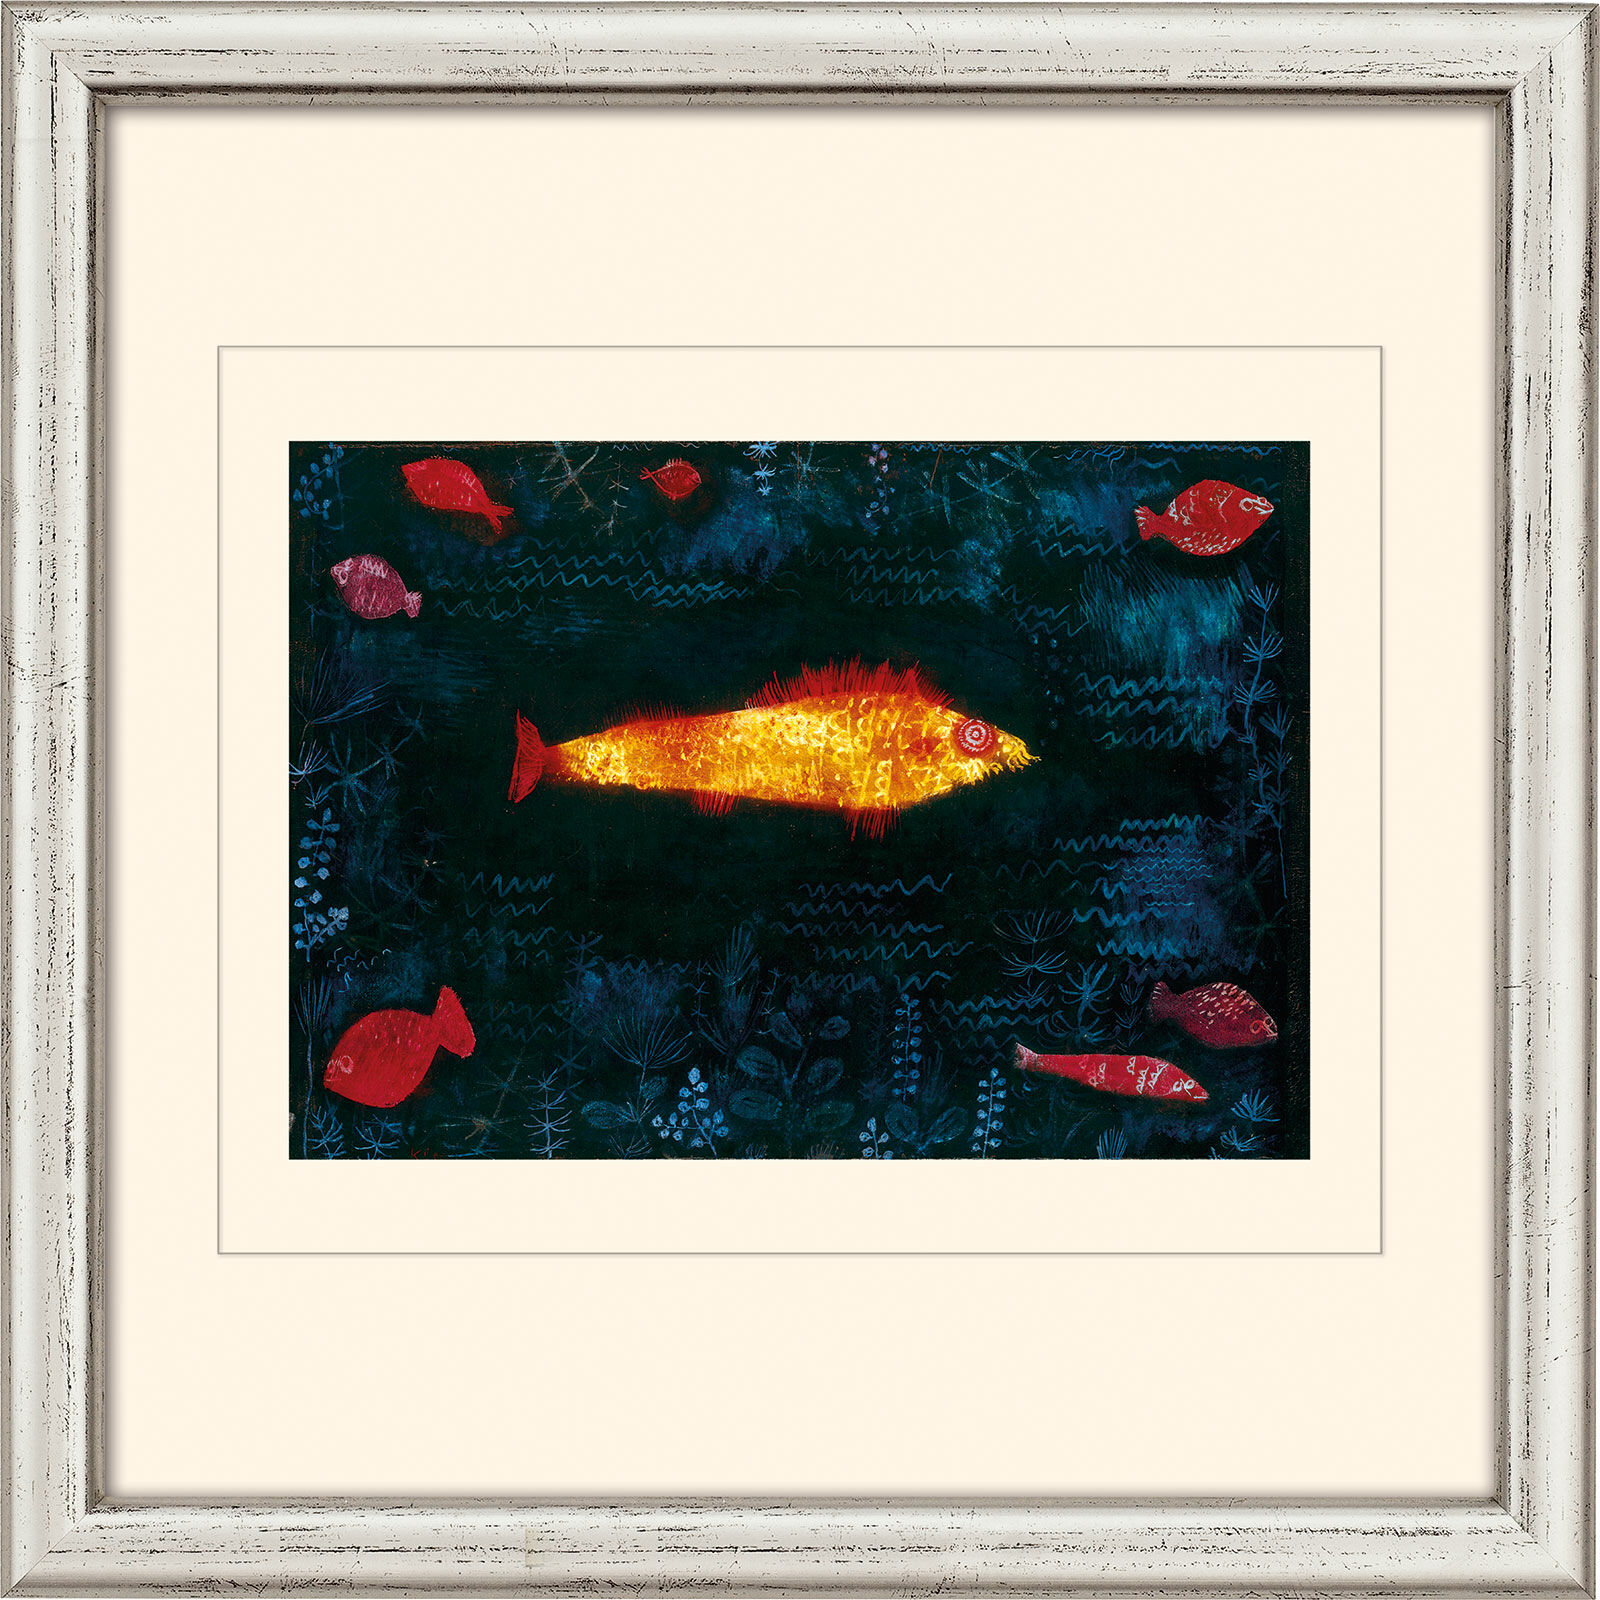 Picture "The Goldfish" (1925), framed by Paul Klee